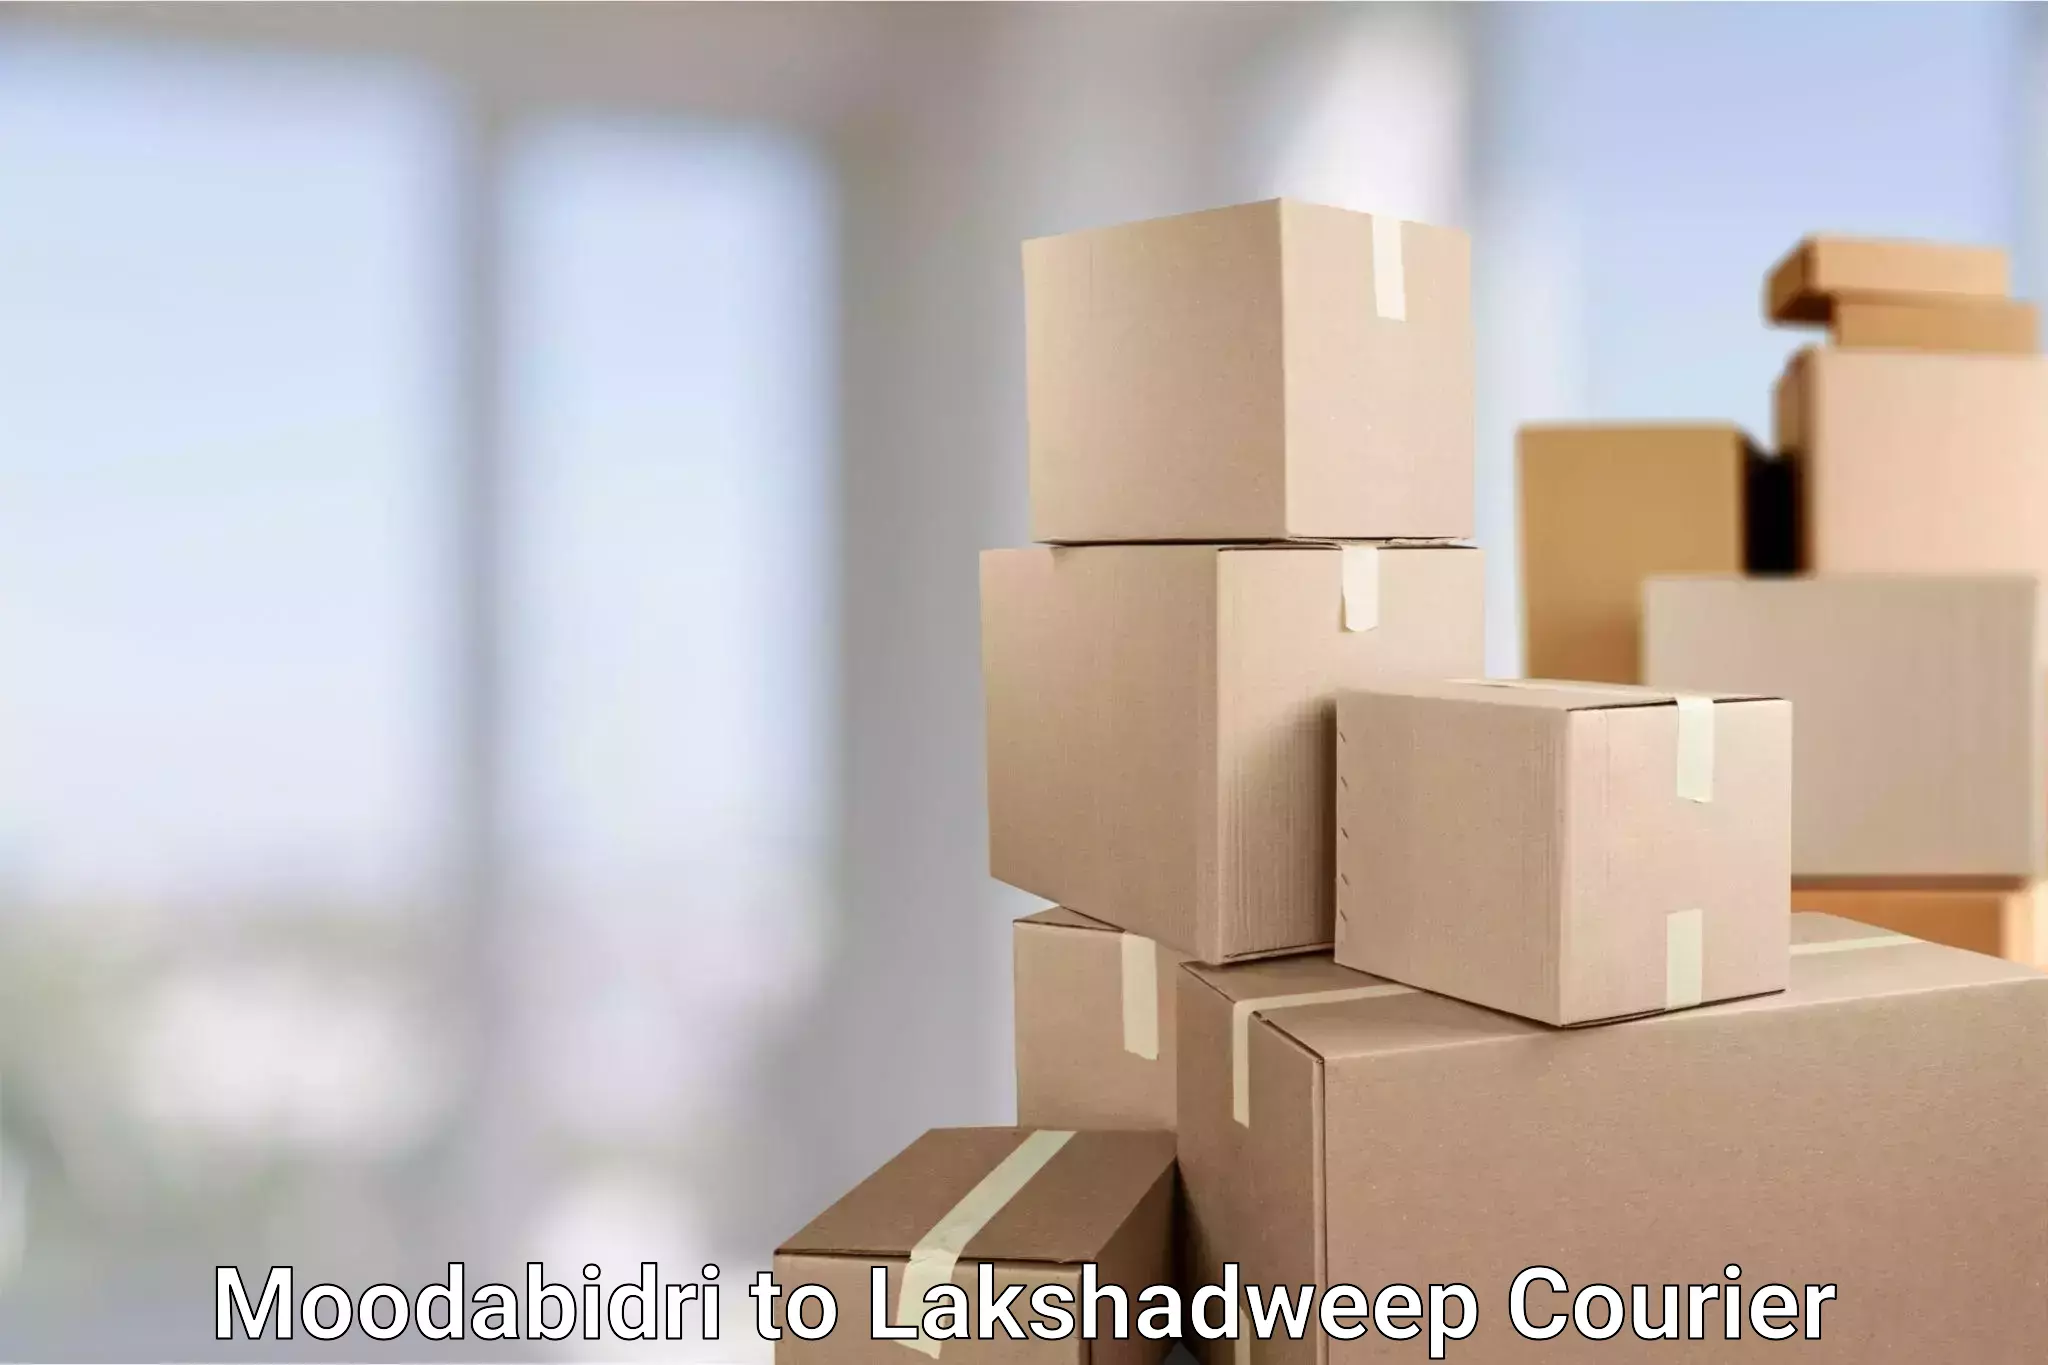 24-hour courier services Moodabidri to Lakshadweep